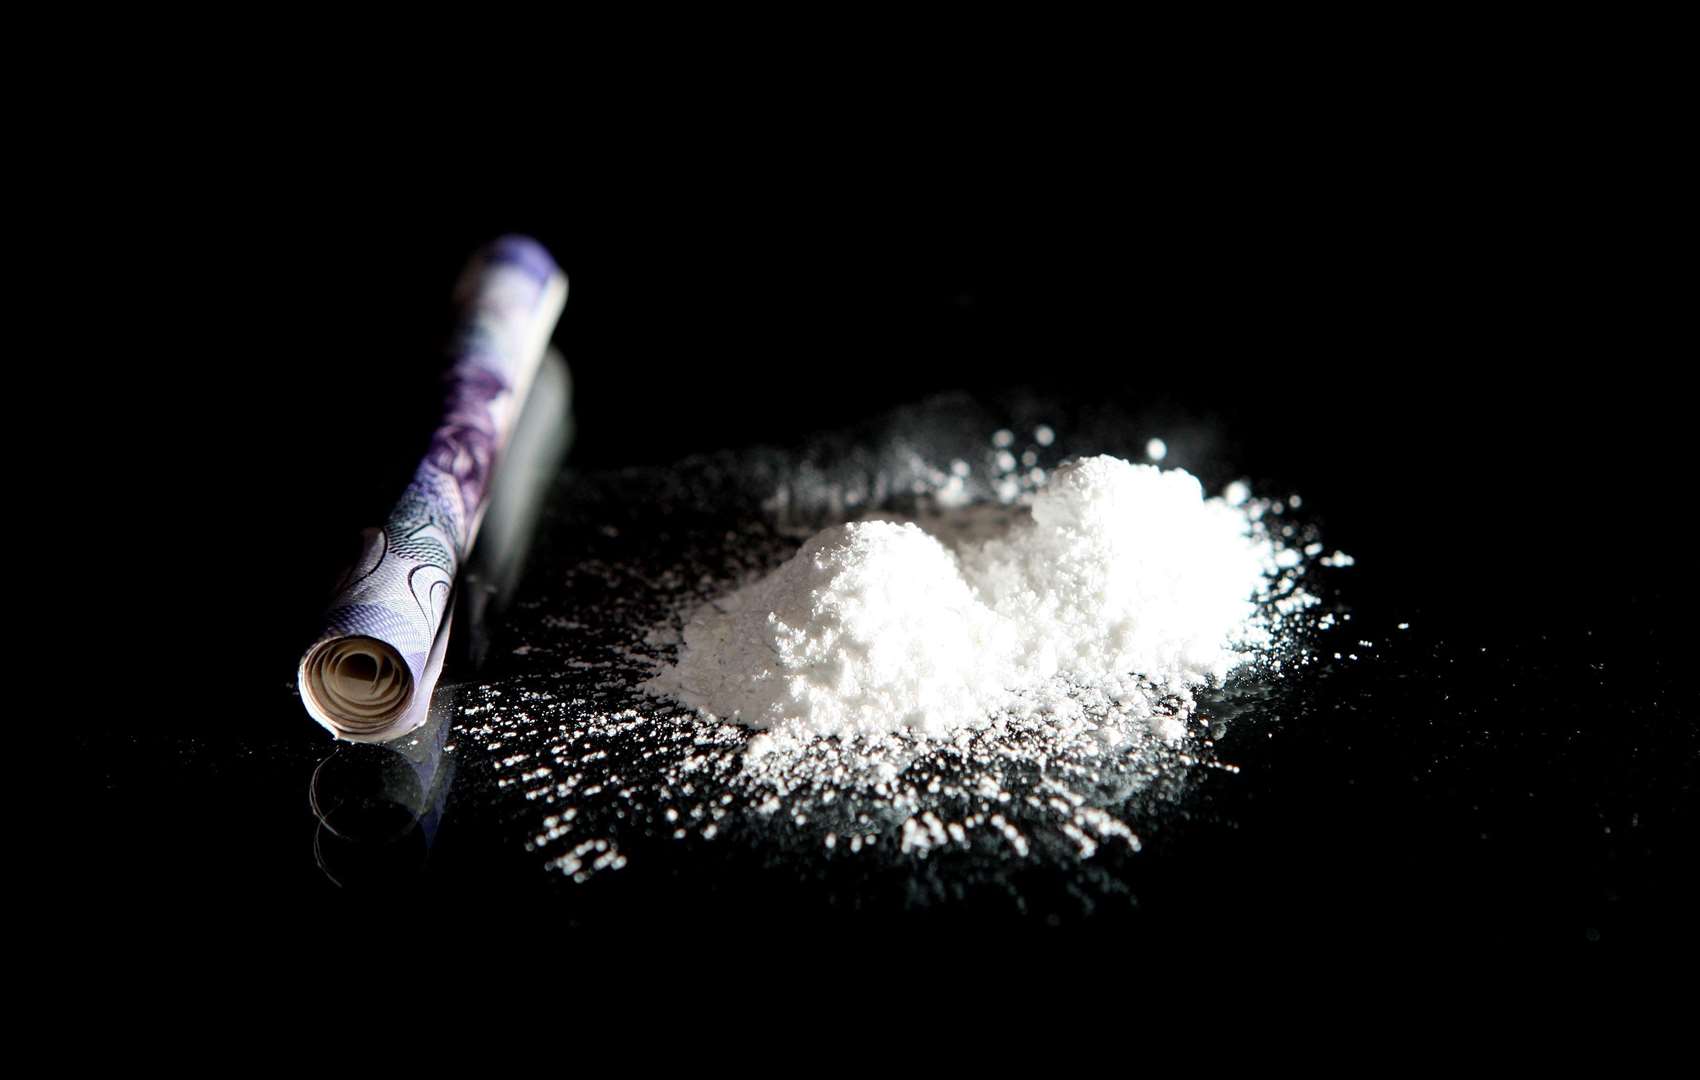 Three men were charged over cocaine supply following a police stop